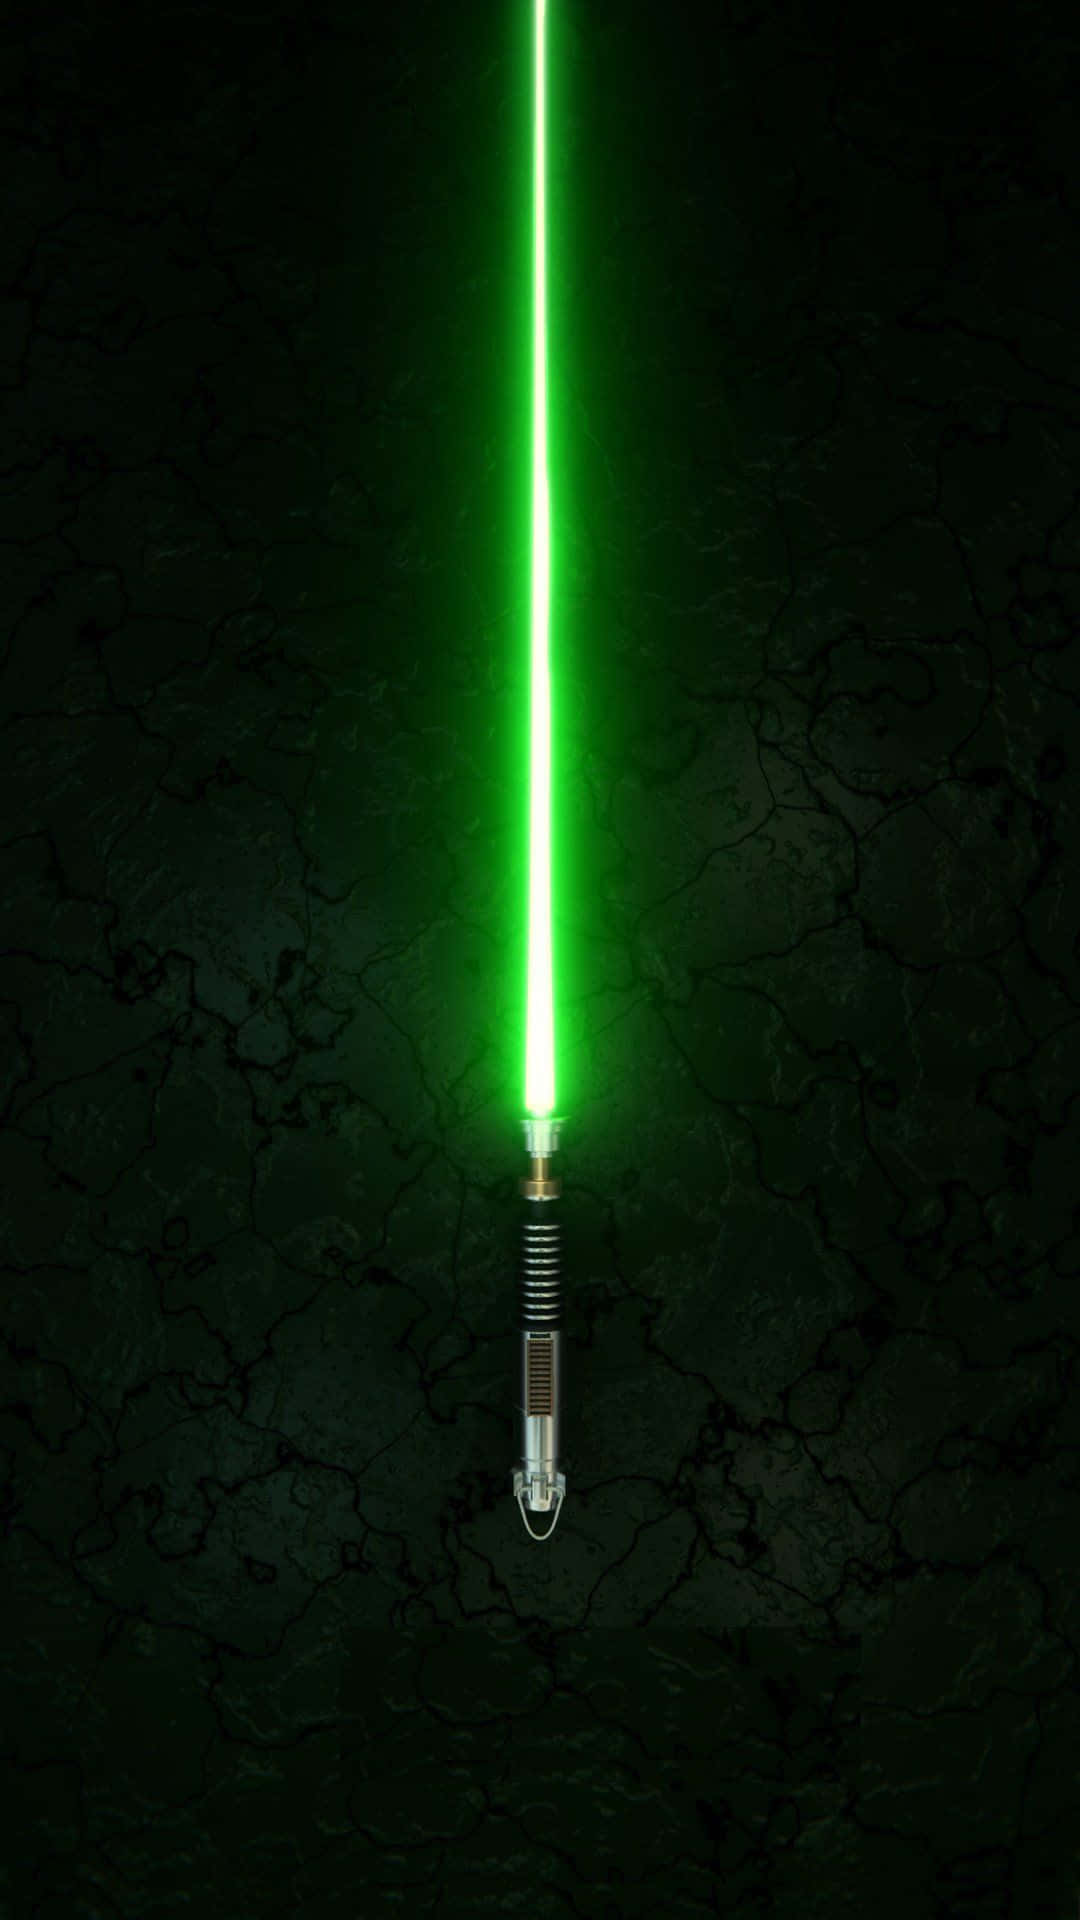 A beam of hope and power - the Jedi Lightsaber Wallpaper